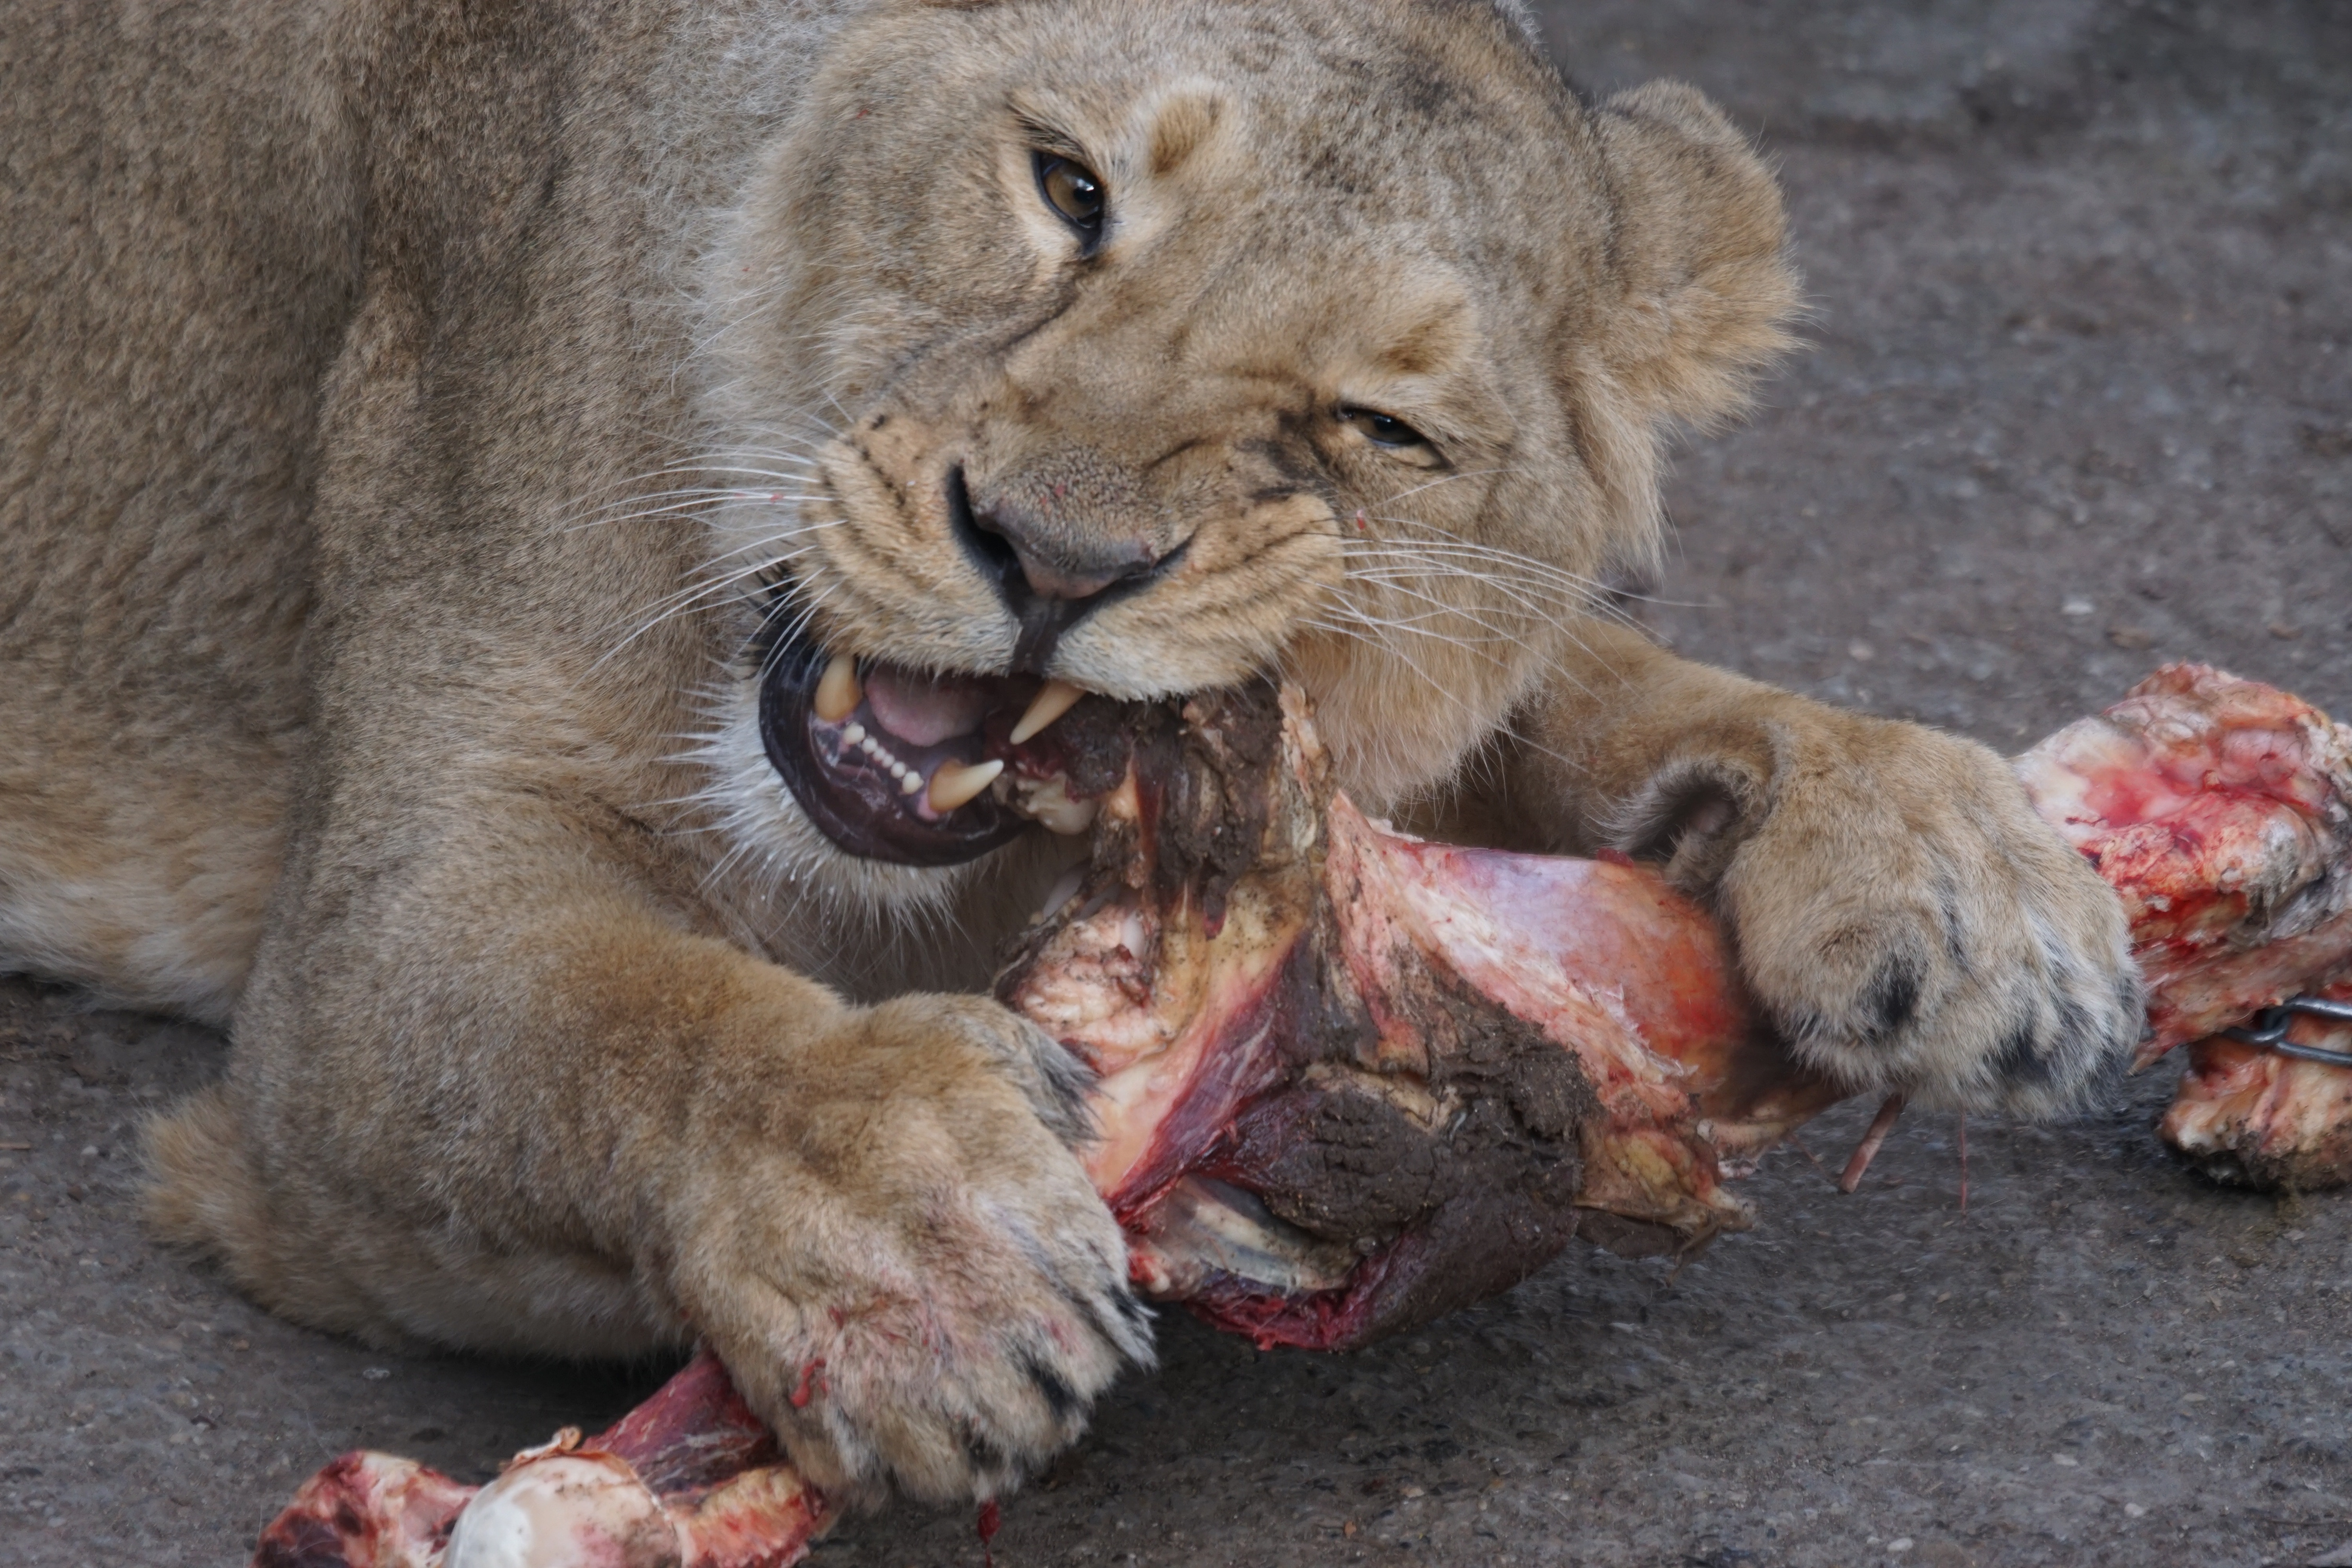 Lioness biting a meat